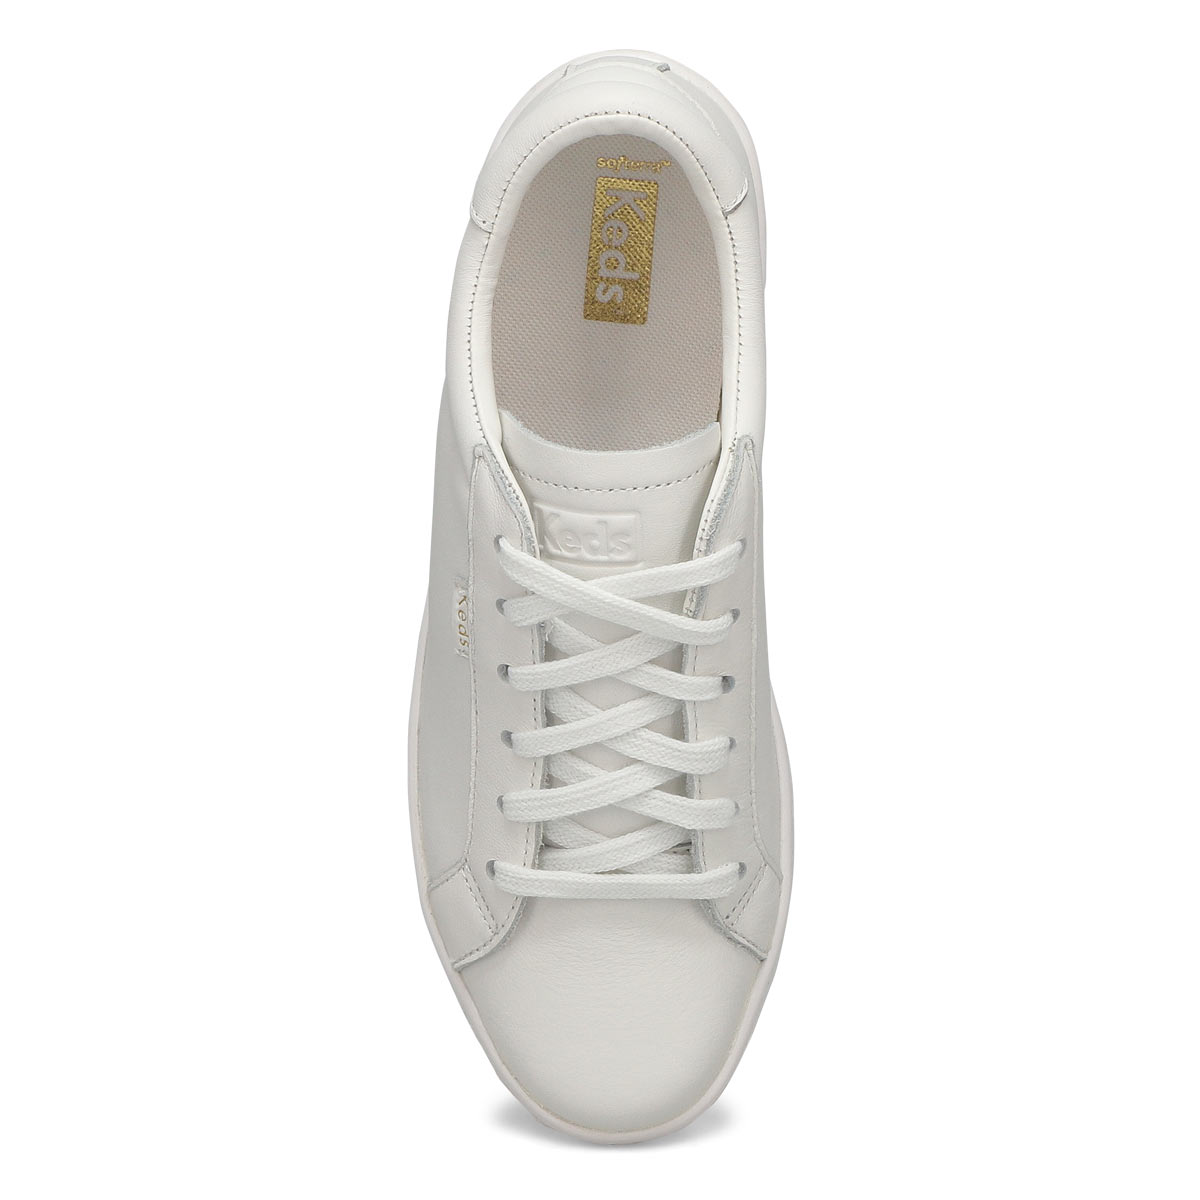 Keds Women's ACE white/coral leather lace up | SoftMoc.com